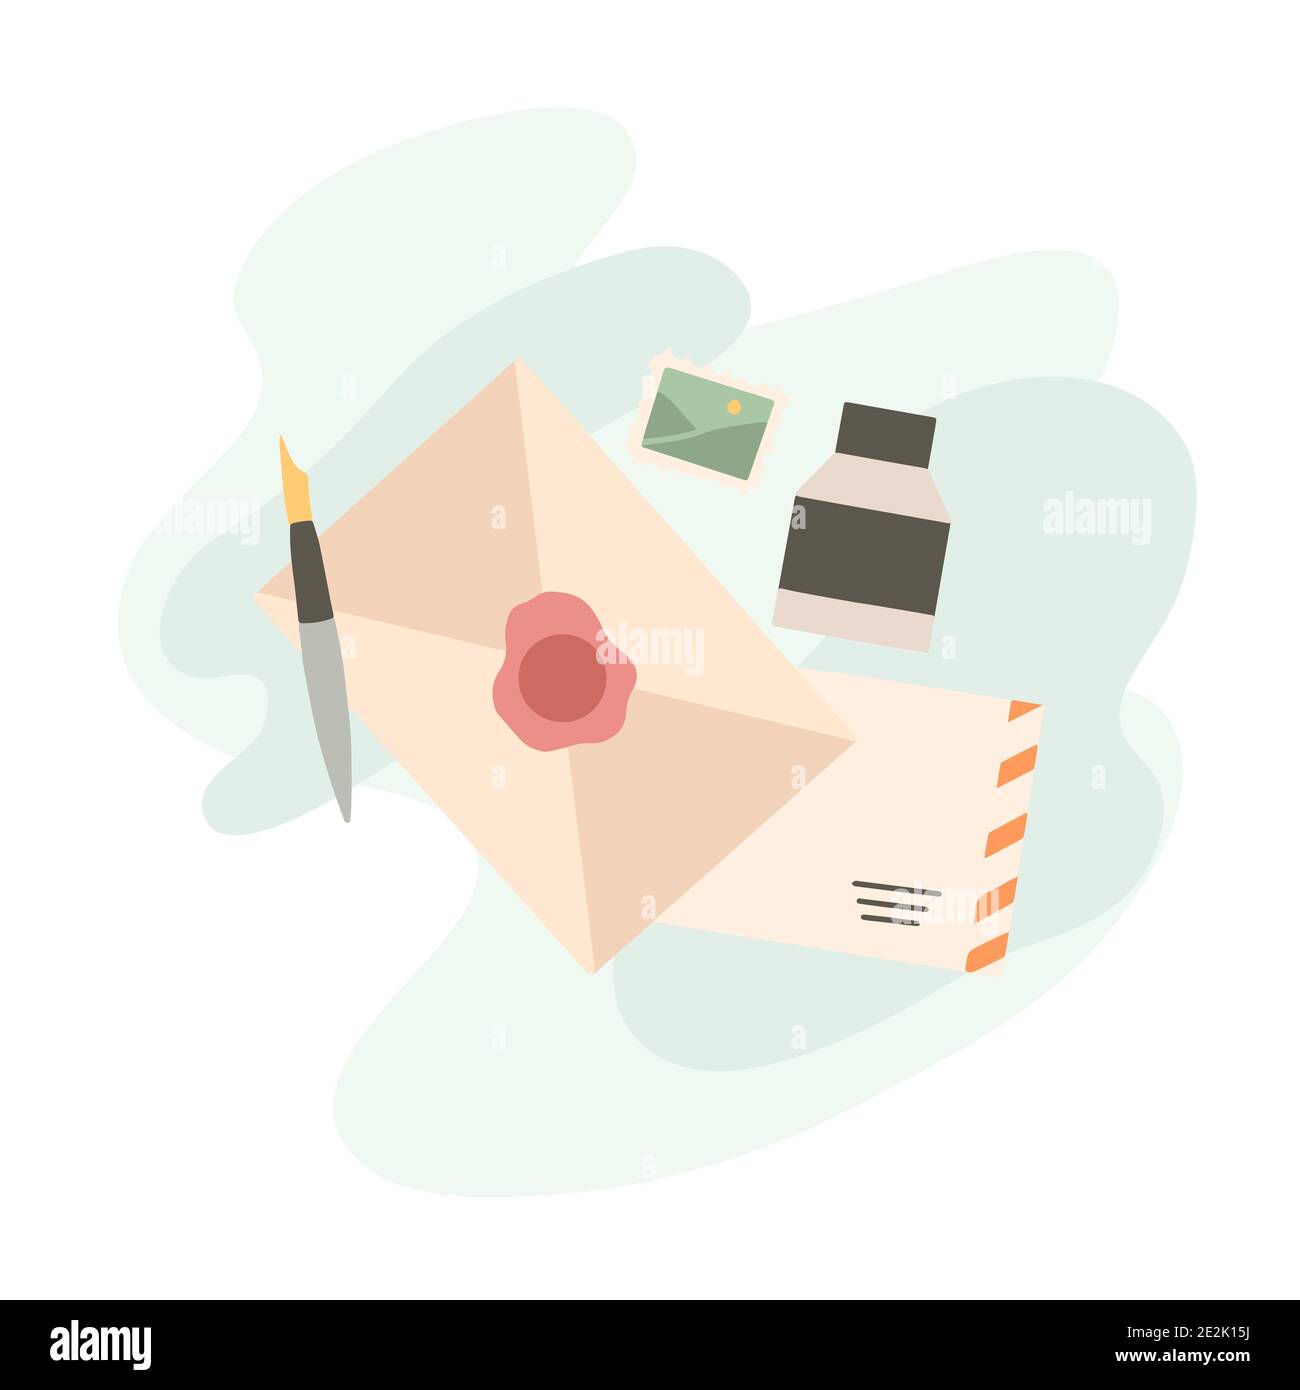 Hand drawn flat illustration of paper envelopes, marks, ink bottle and pen on abstract background. Old mail delivery. Letters and Correspondence. Vect Stock Vector